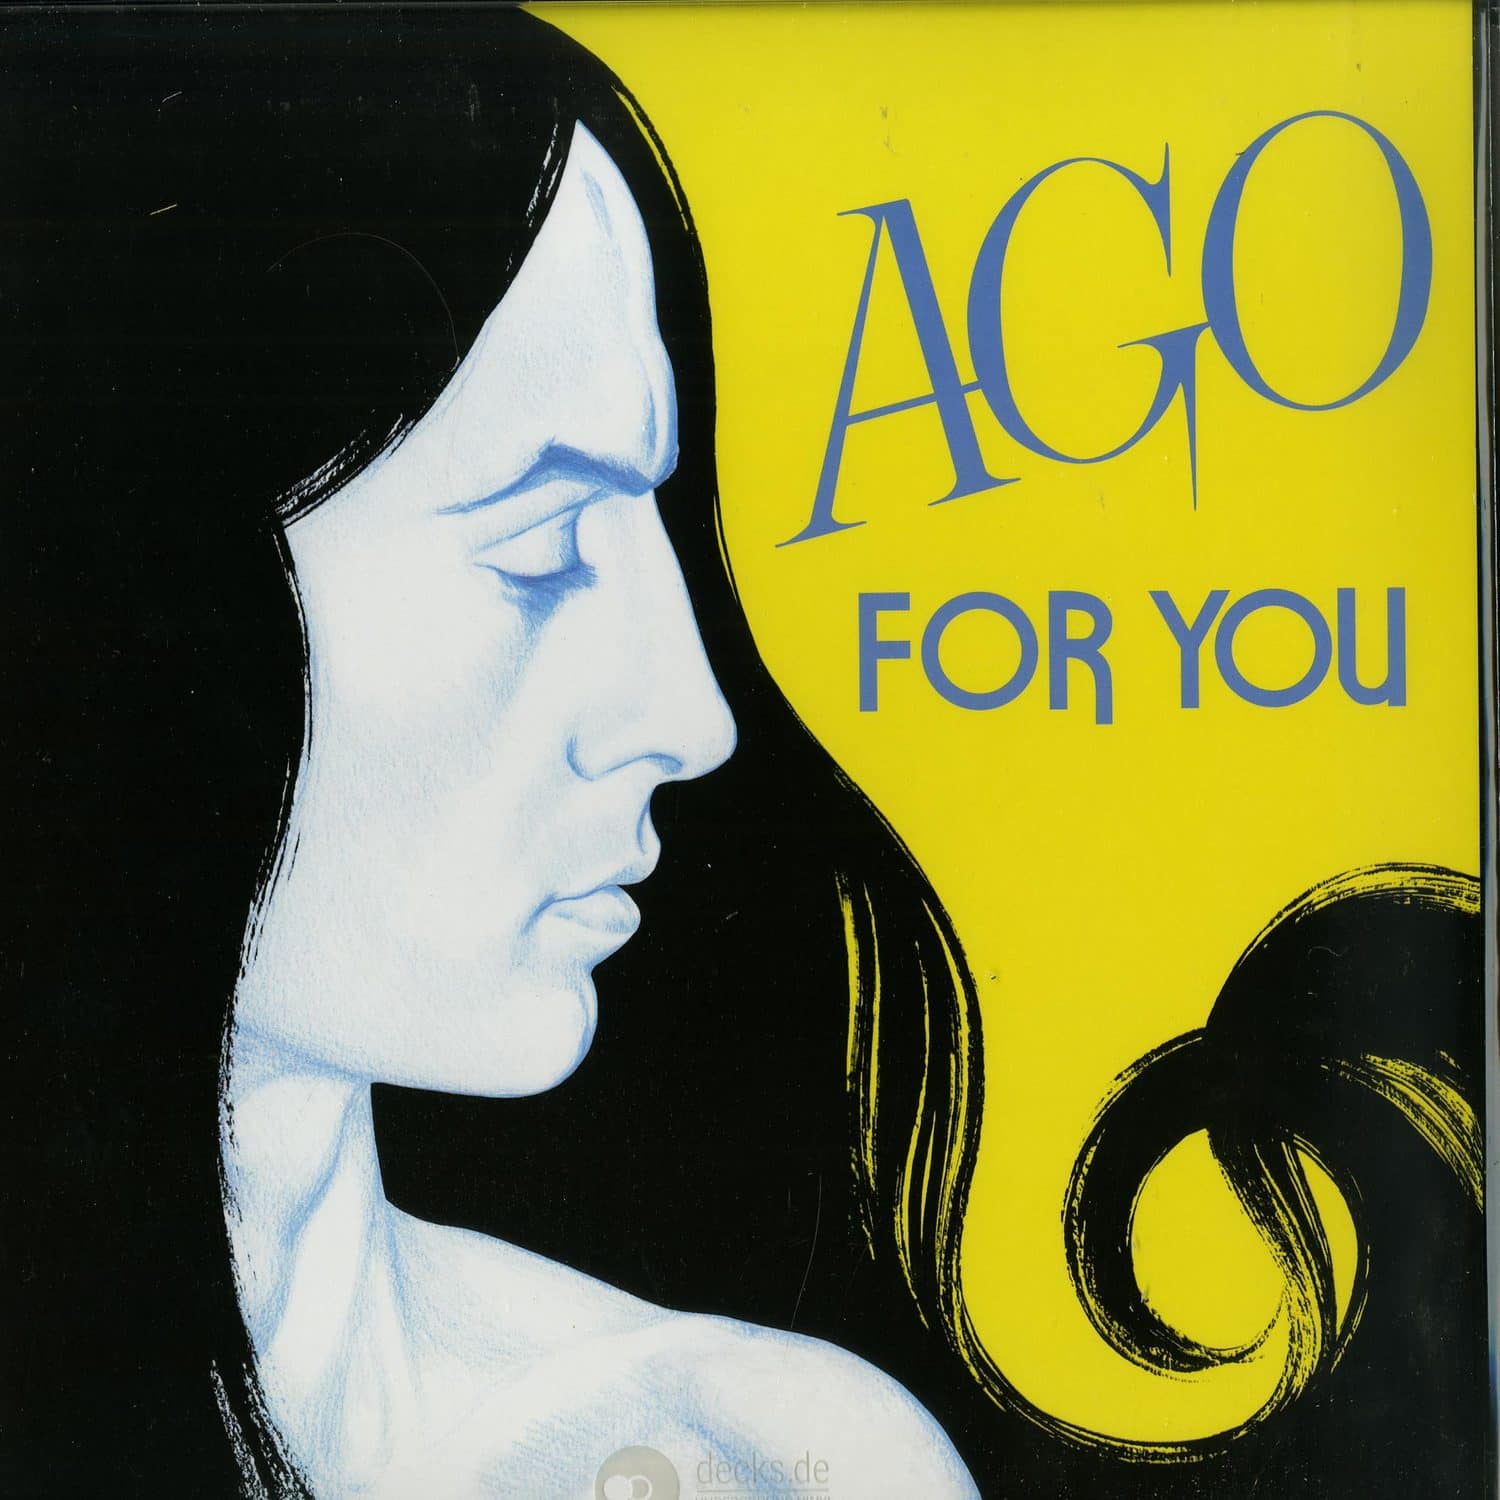 Ago - FOR YOU 